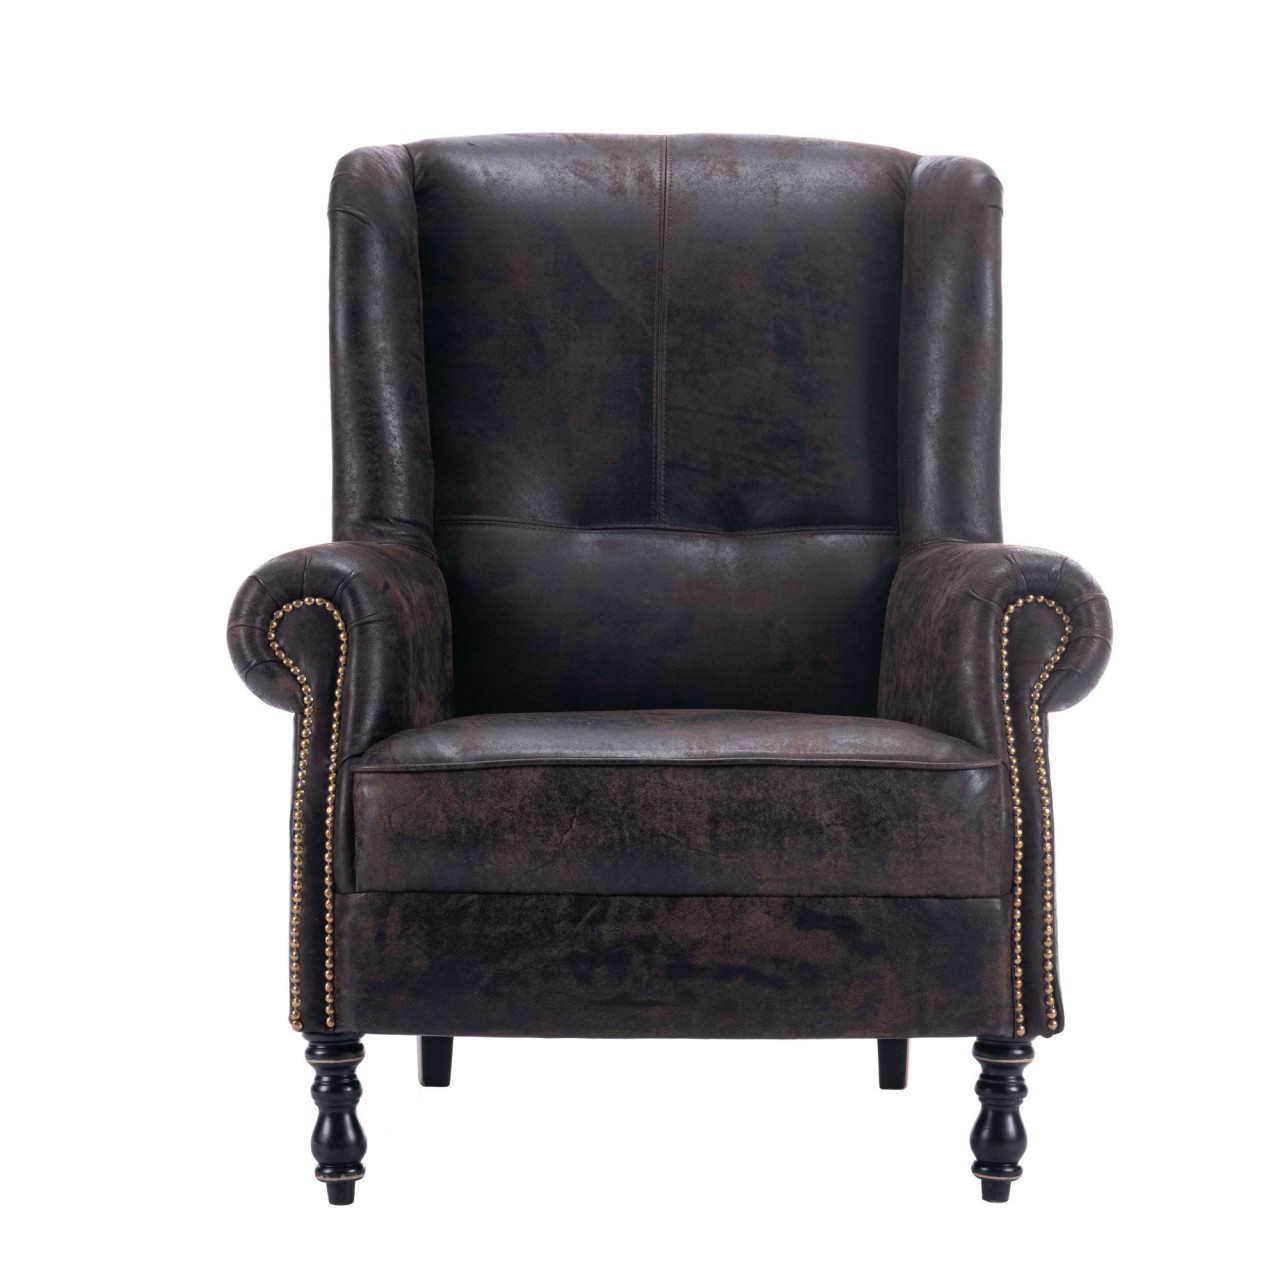 BRYANT WING CHAIR (Leather)